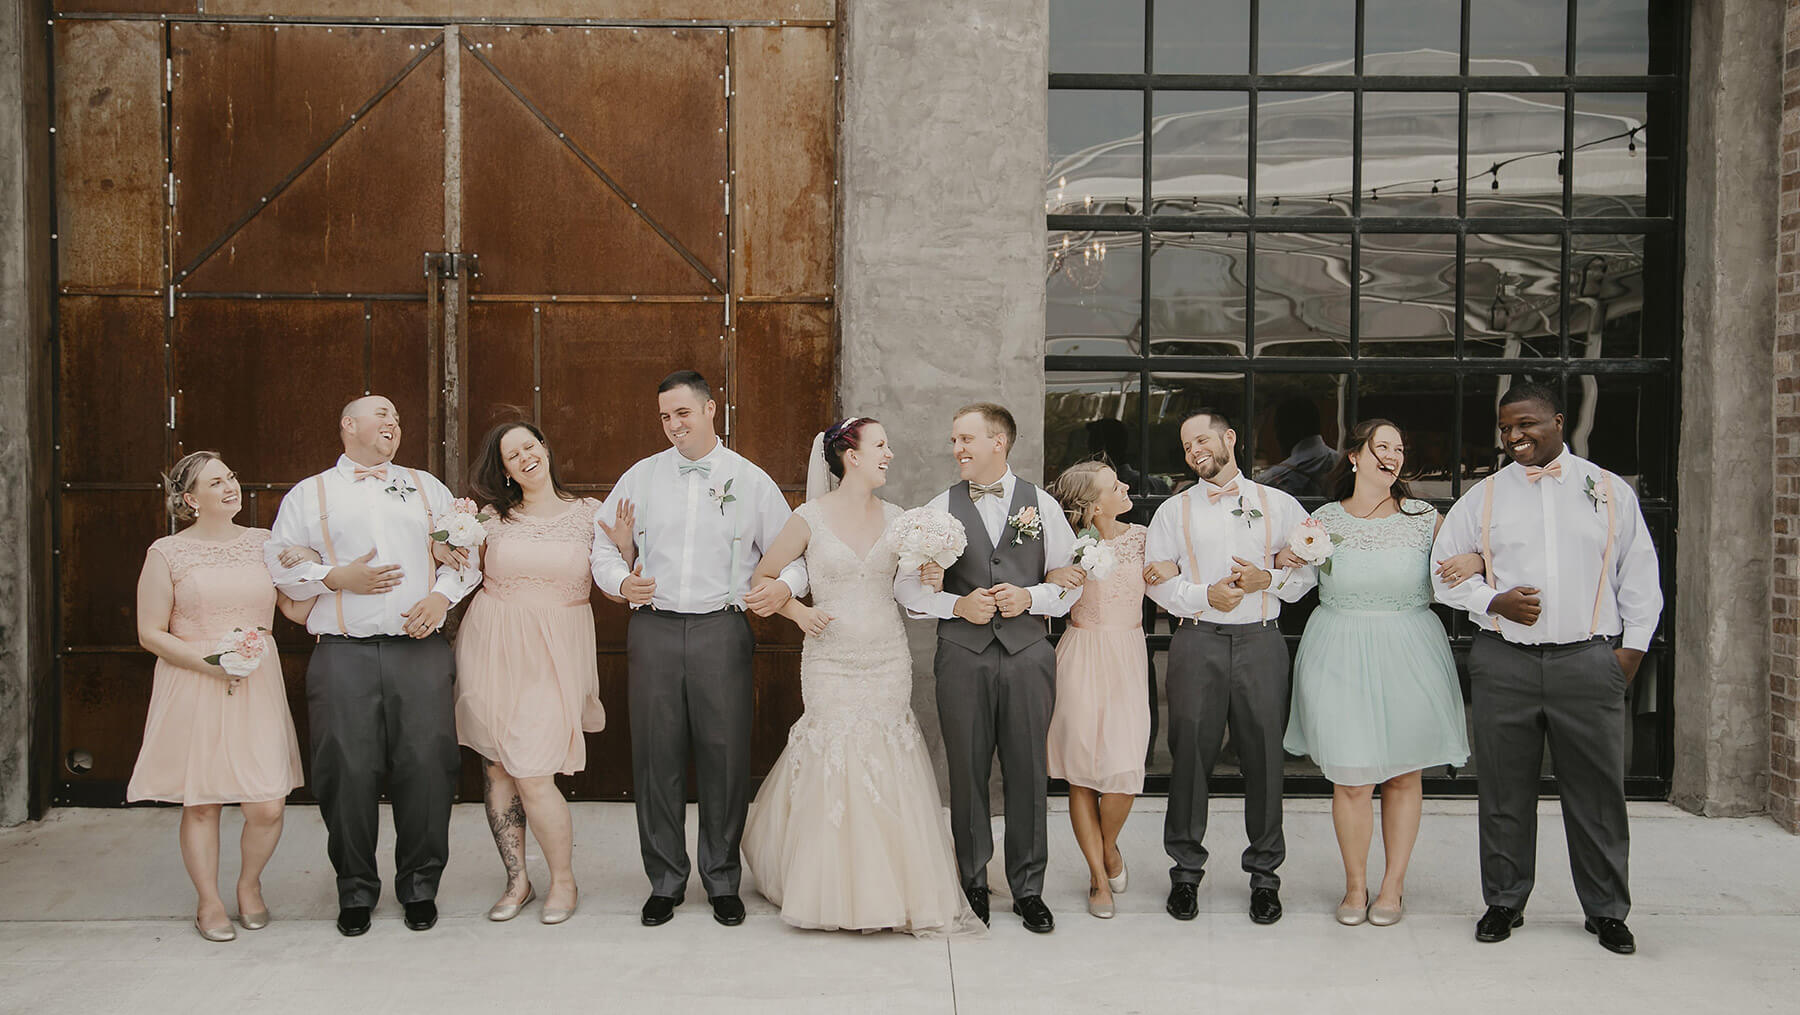 A smiling wedding party linked arm in arm, stands in front of the Brick & Mortar building.